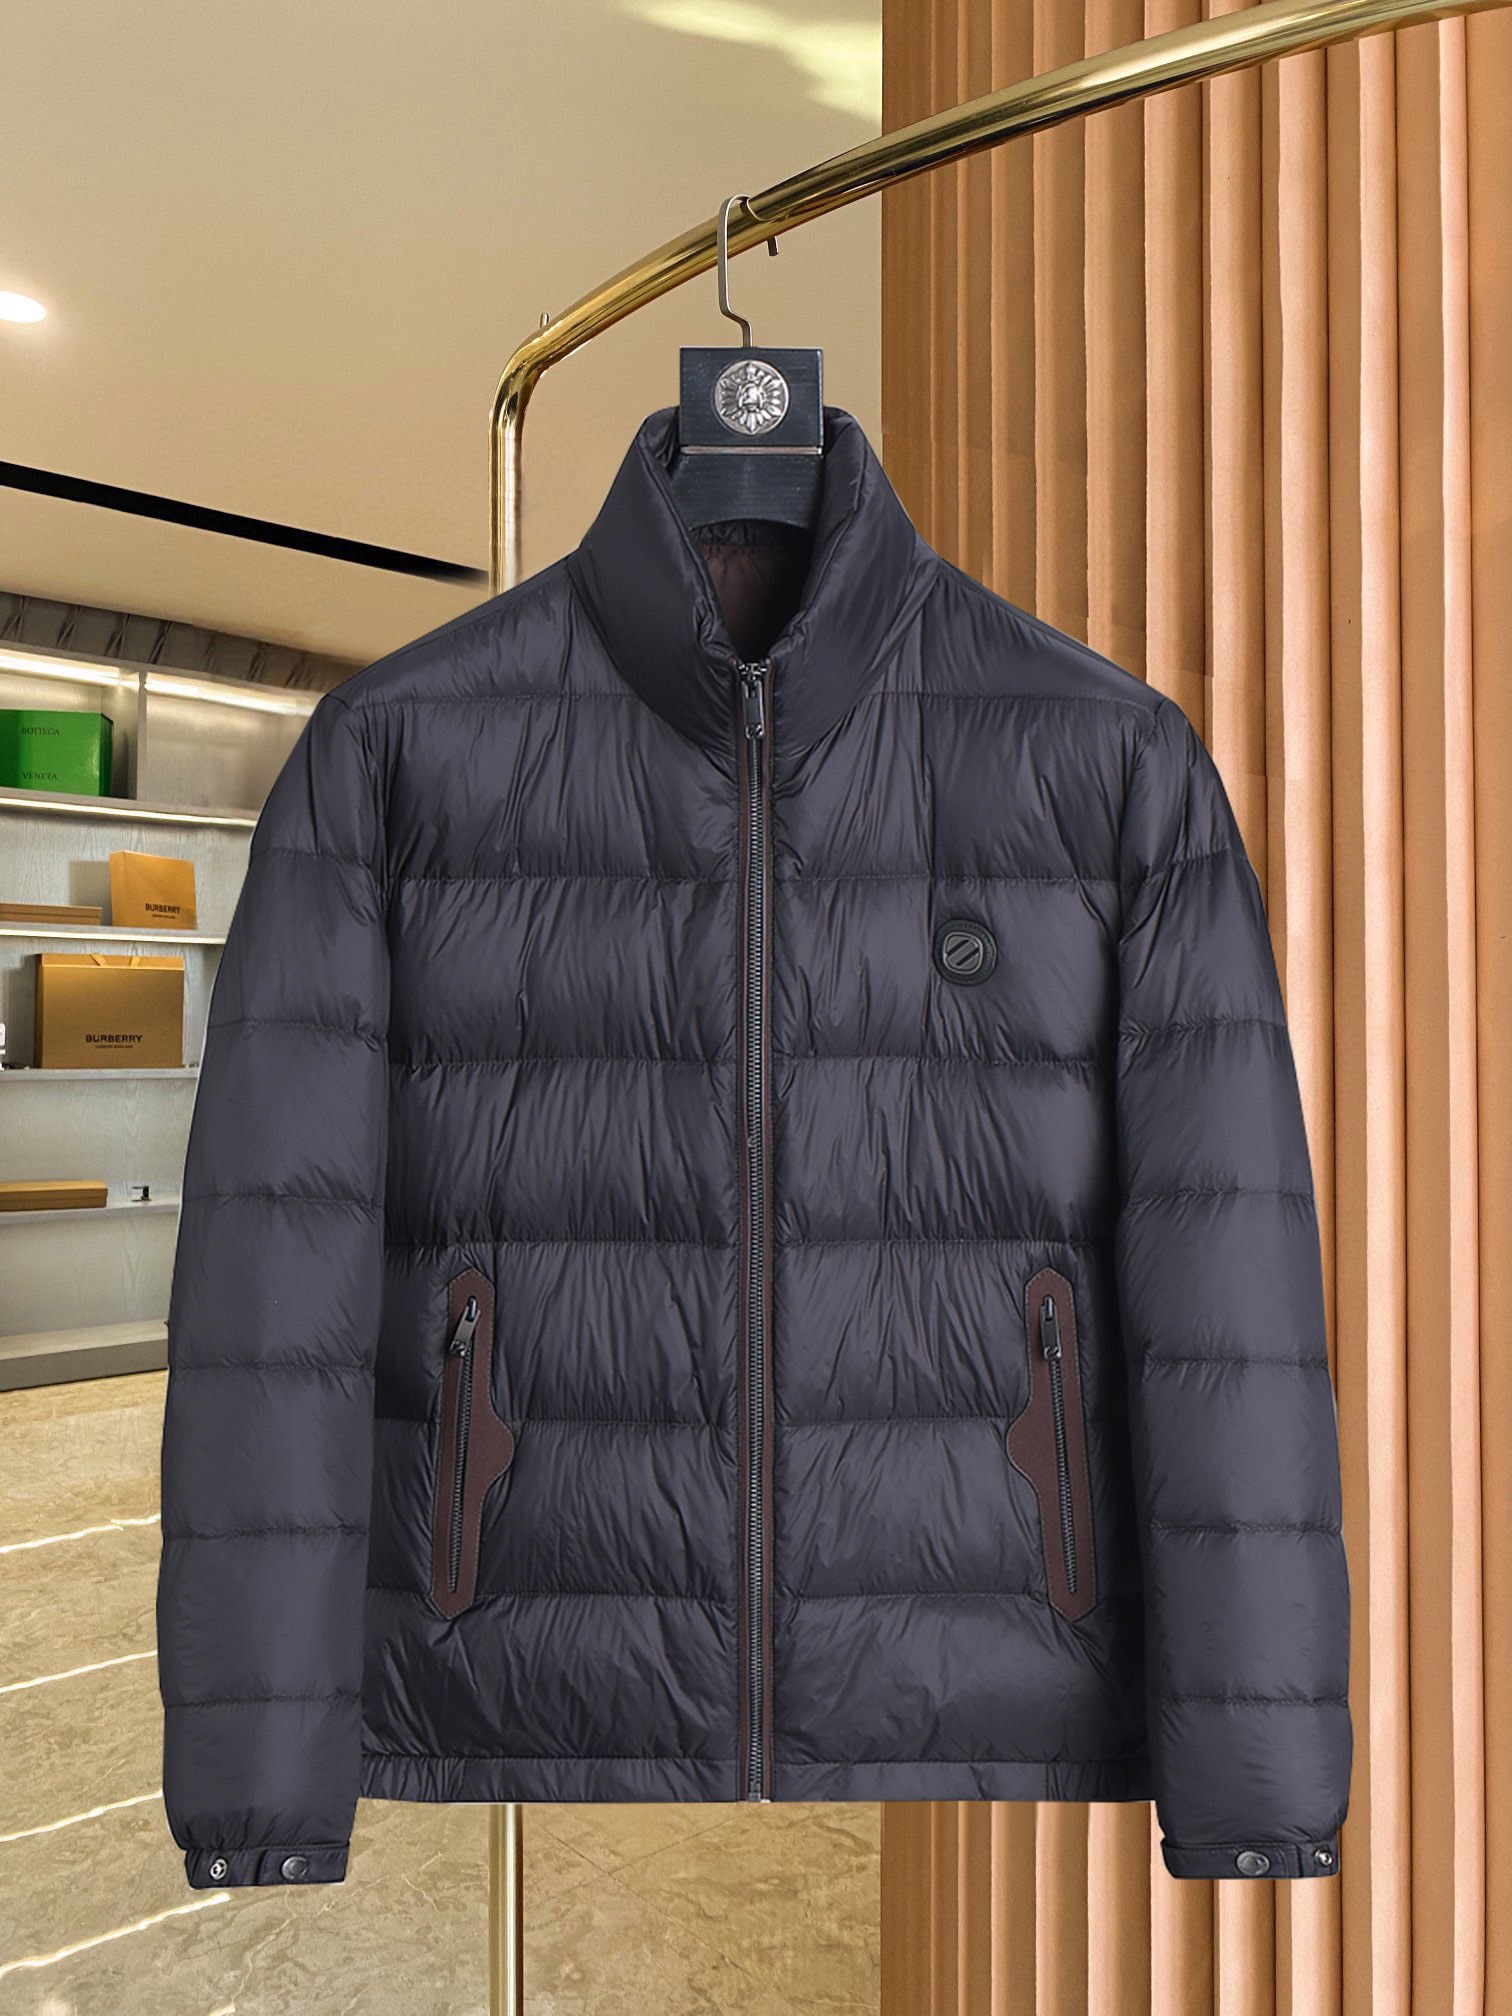 Zegna Clothing Coats & Jackets Fall/Winter Collection Fashion Casual